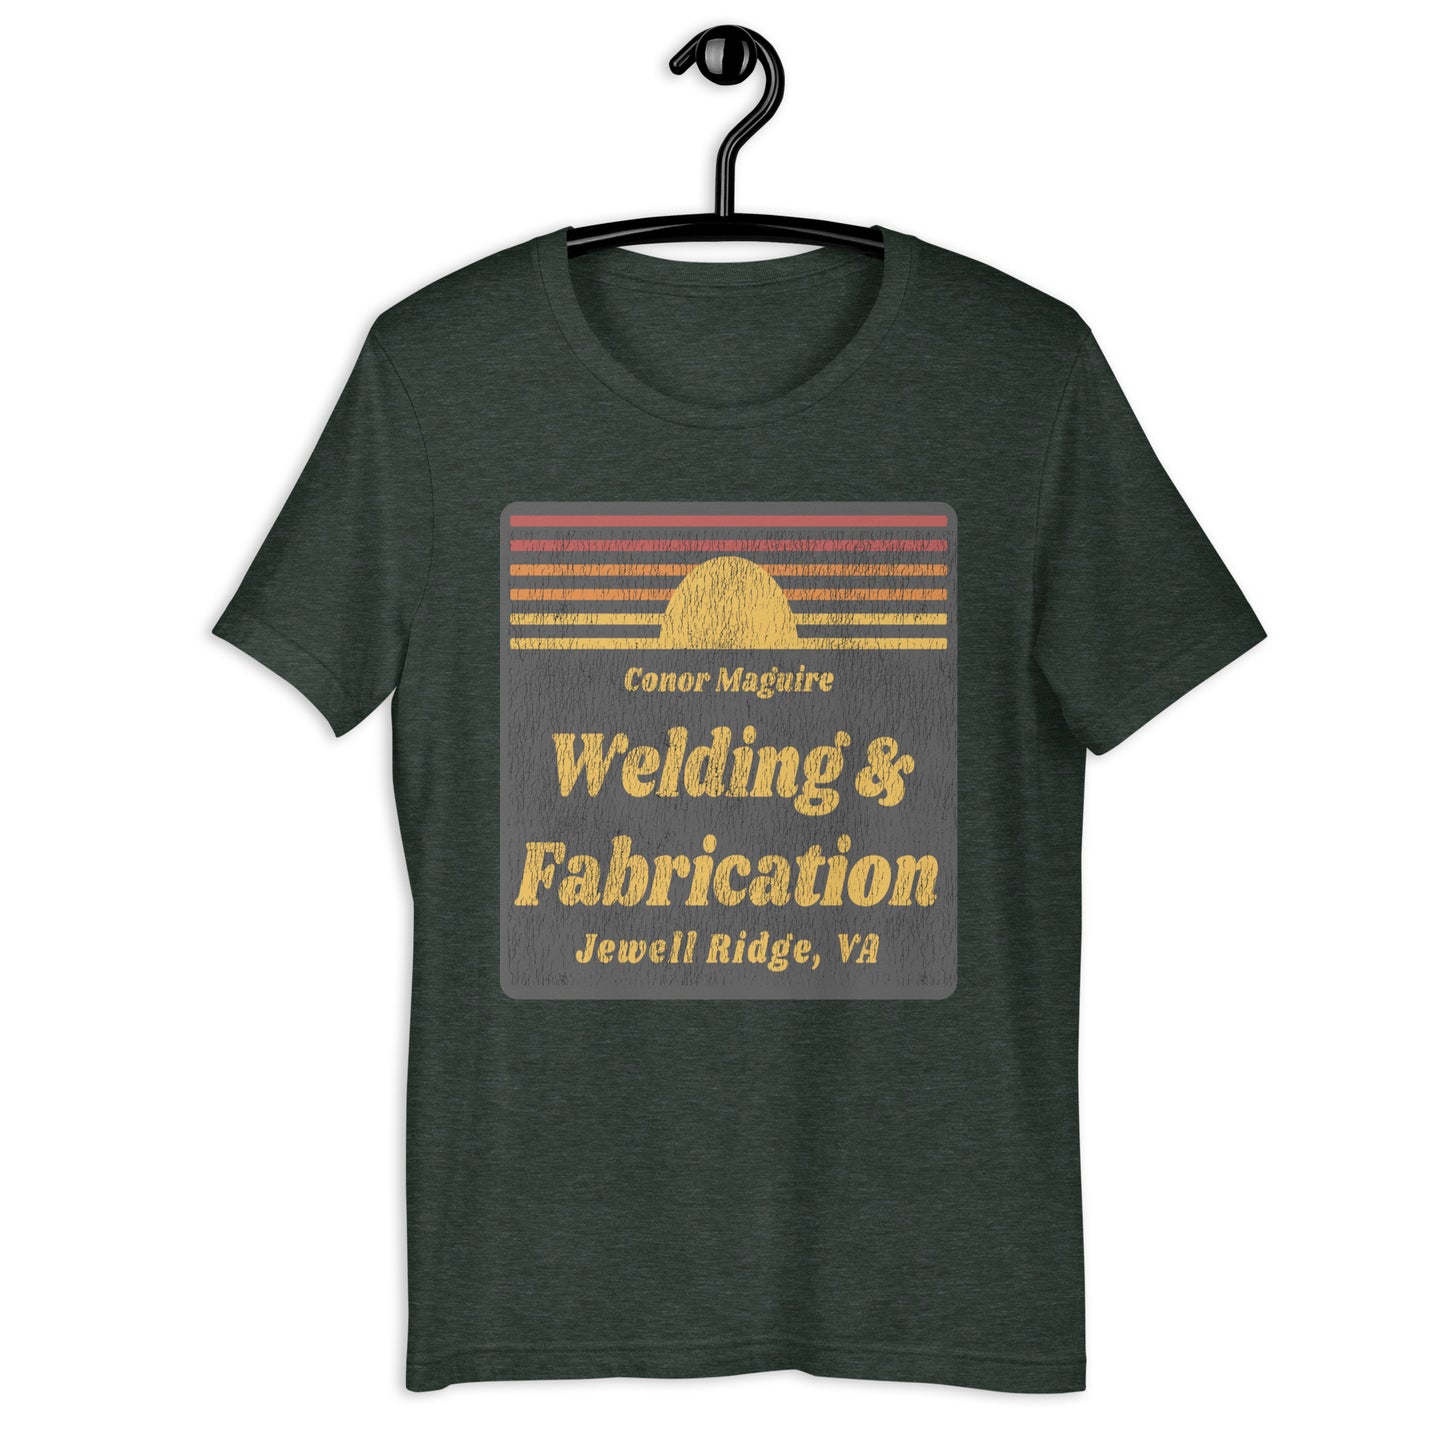 Conor Maguire Welding & Fabrication Crackled Sunset Unisex t-shirt